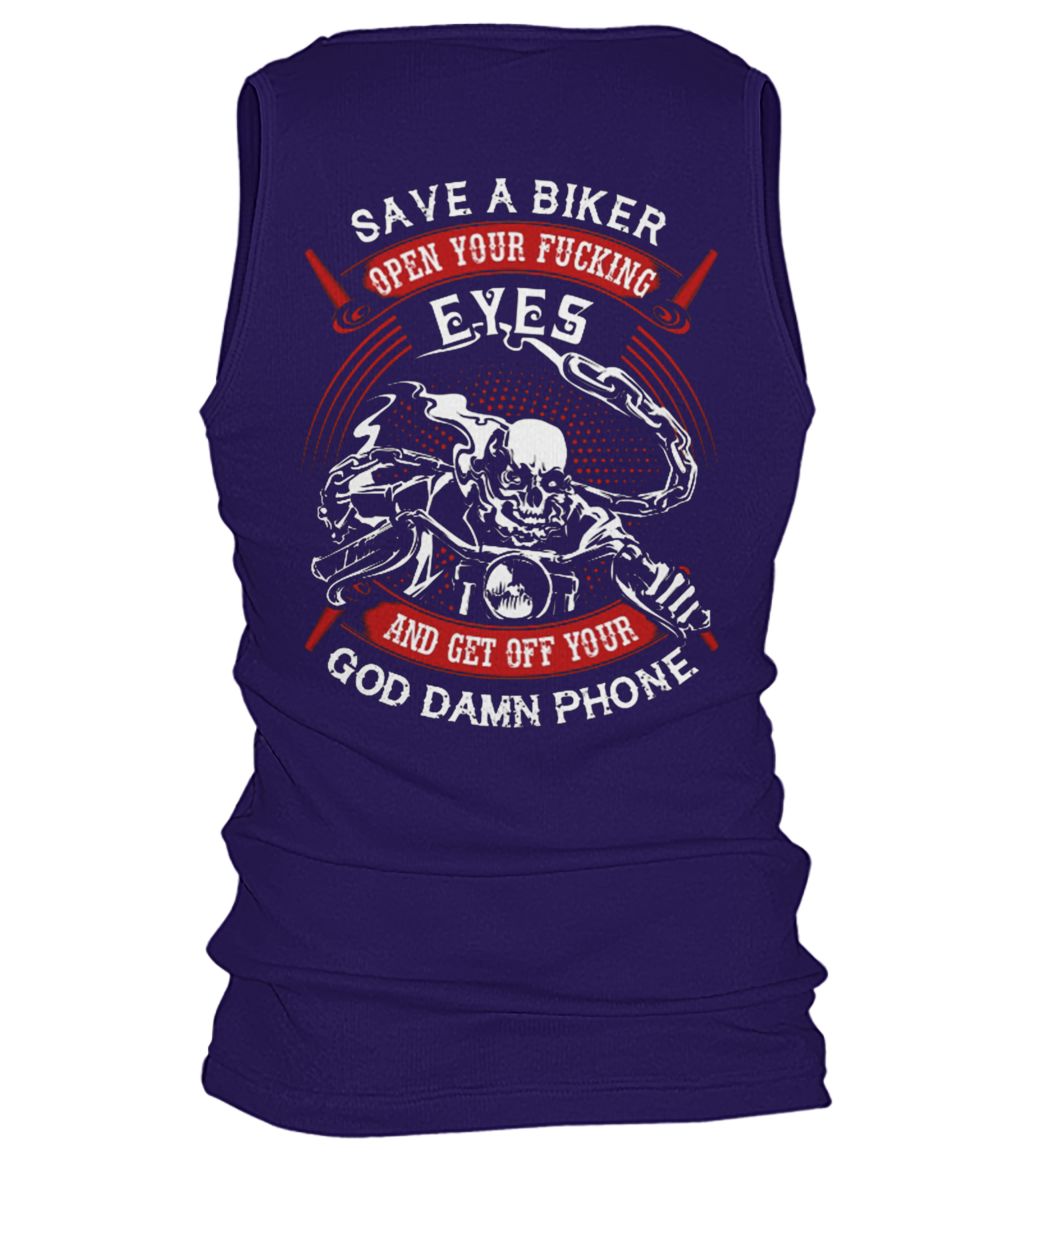 Save a biker open your fucking eyes and get off your god damn phone men's tank top